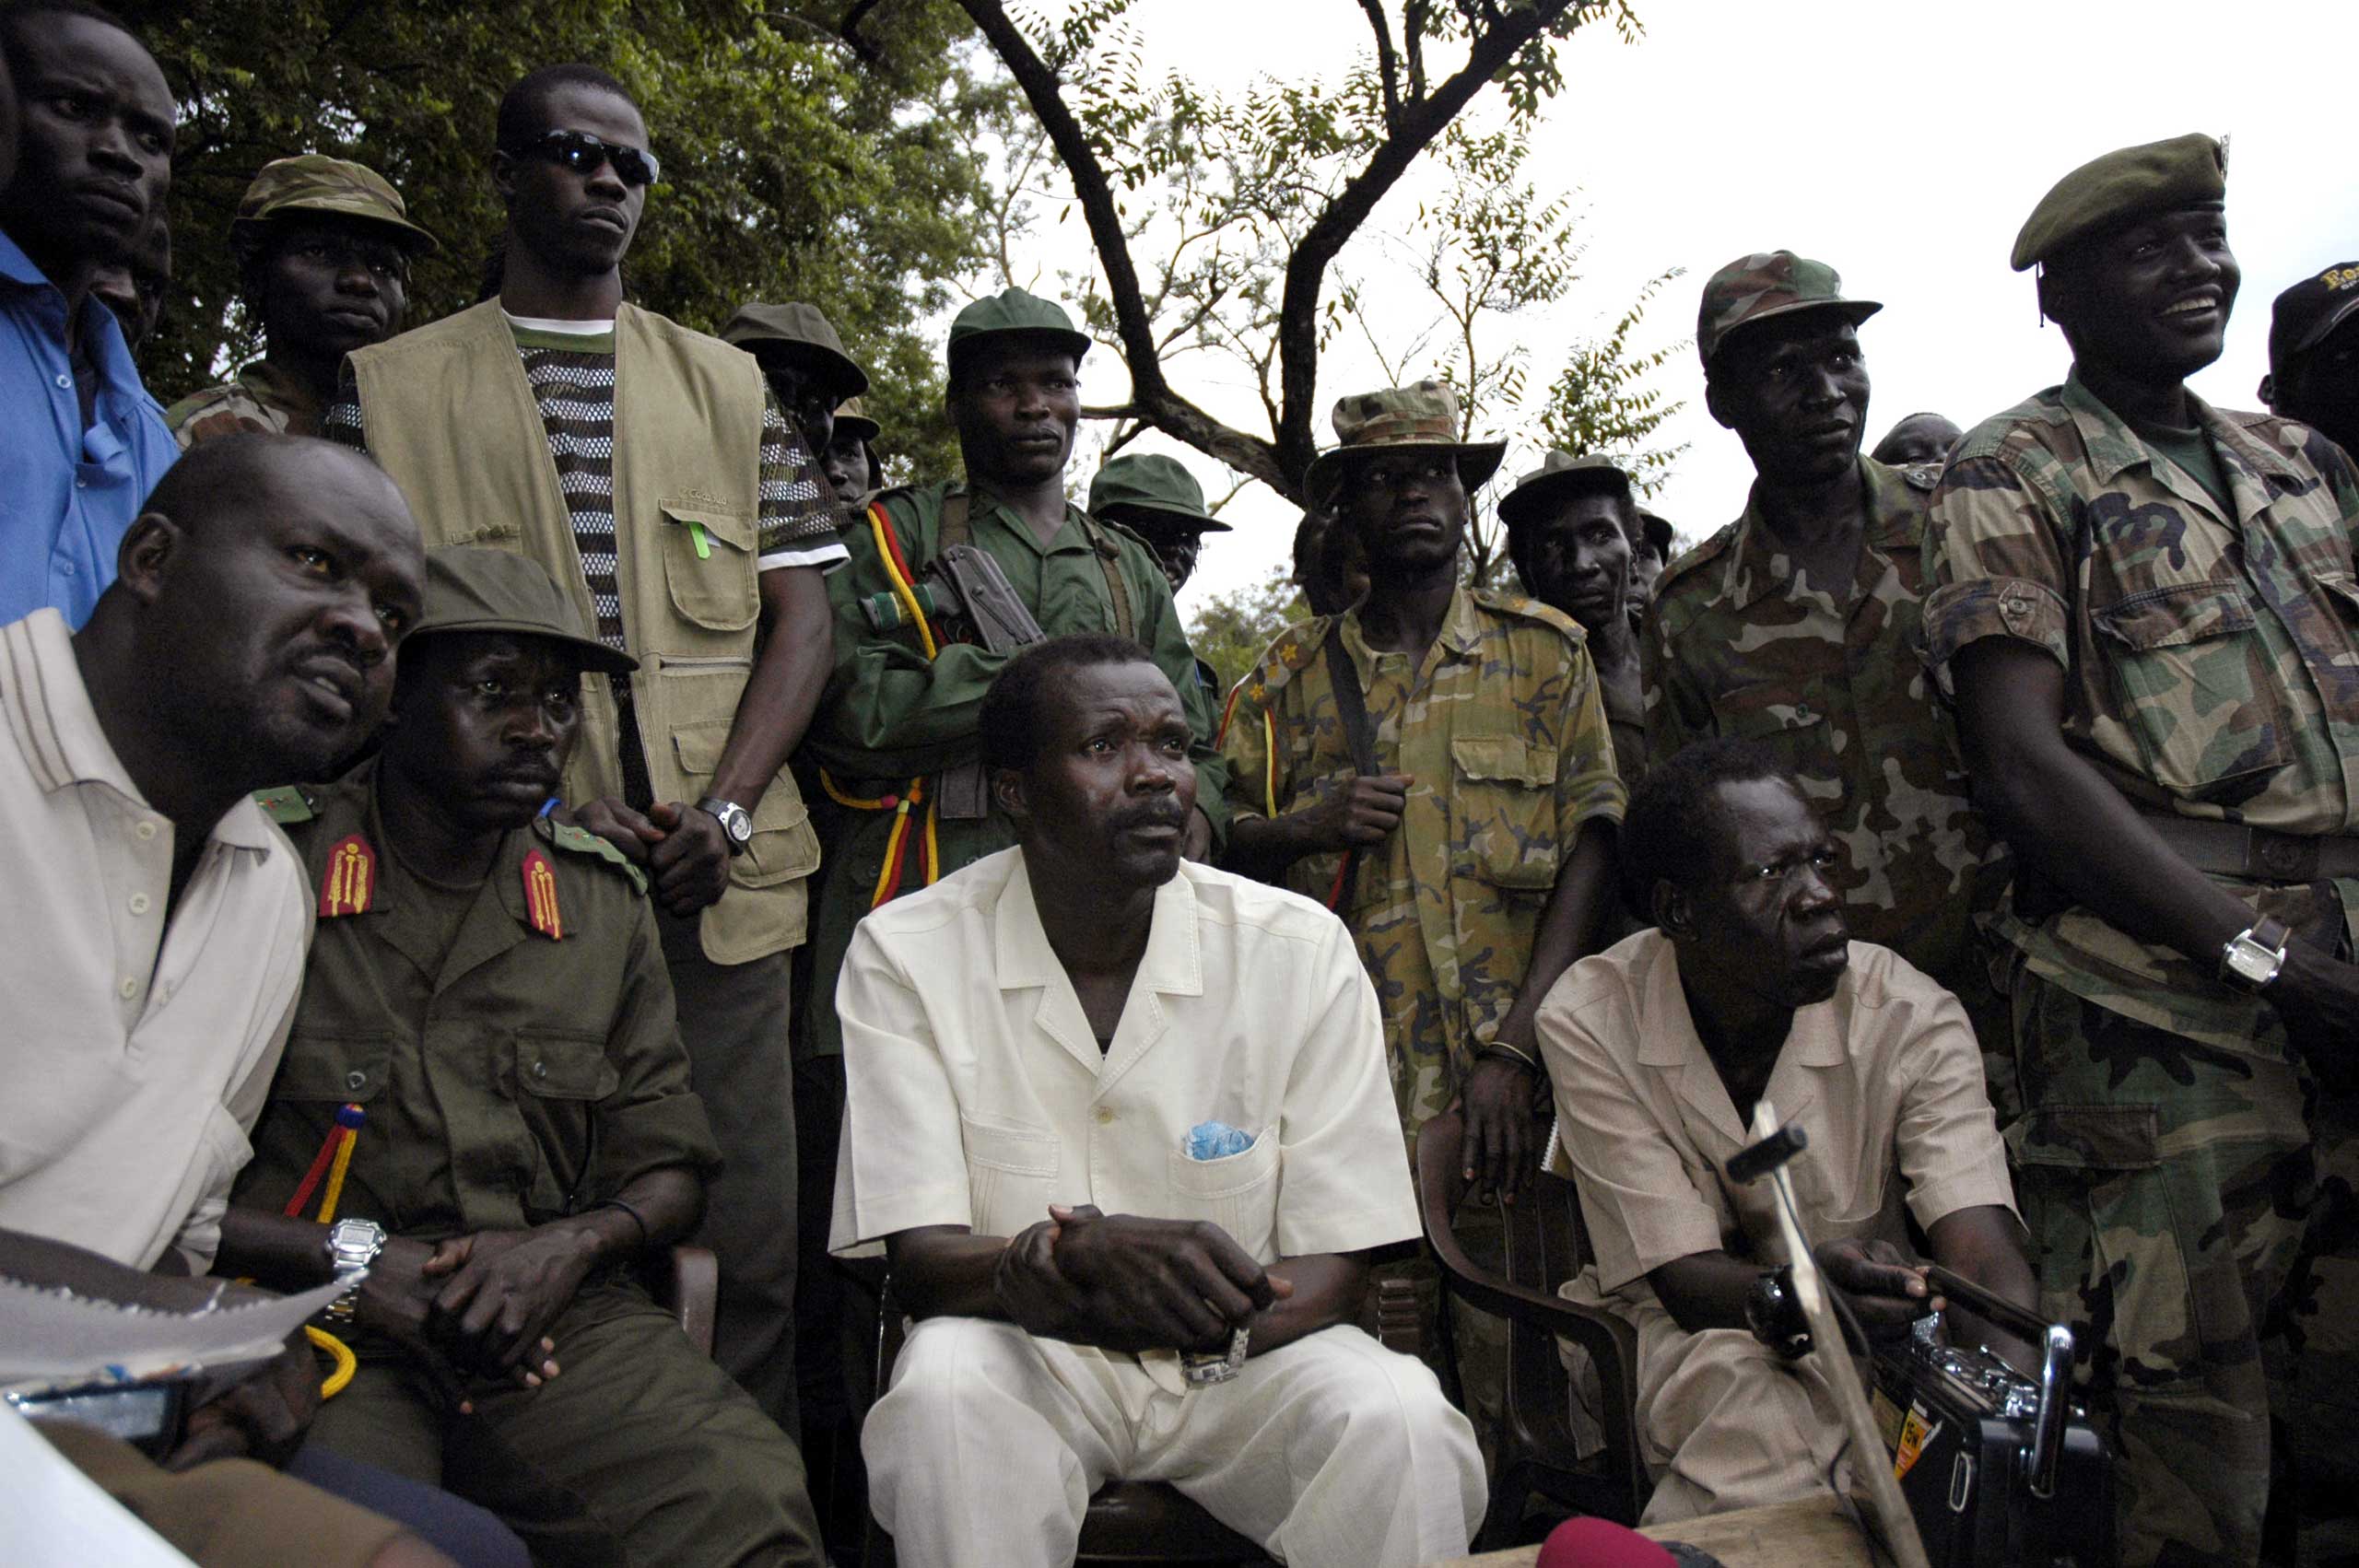 The leader of Uganda's Lord's Resistance Army rebels Joseph Kony (seated C), surrounded by his officers, addresses his first news conference in 20 years of rebellion in Nabanga, Sudan, on Aug. 1, 2006.